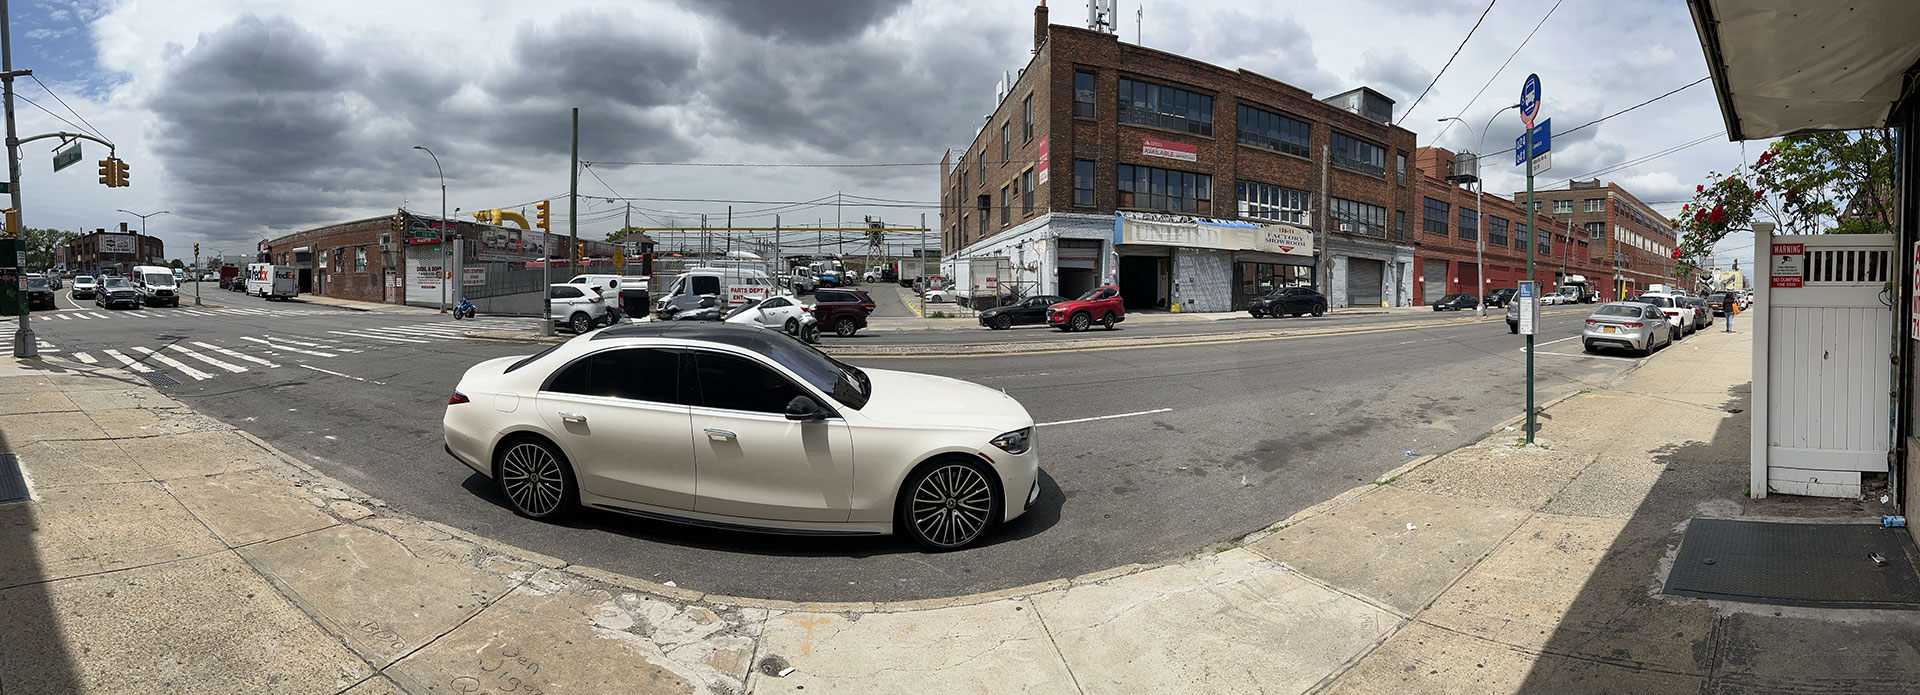 Panorama of vehicles like cars on a road